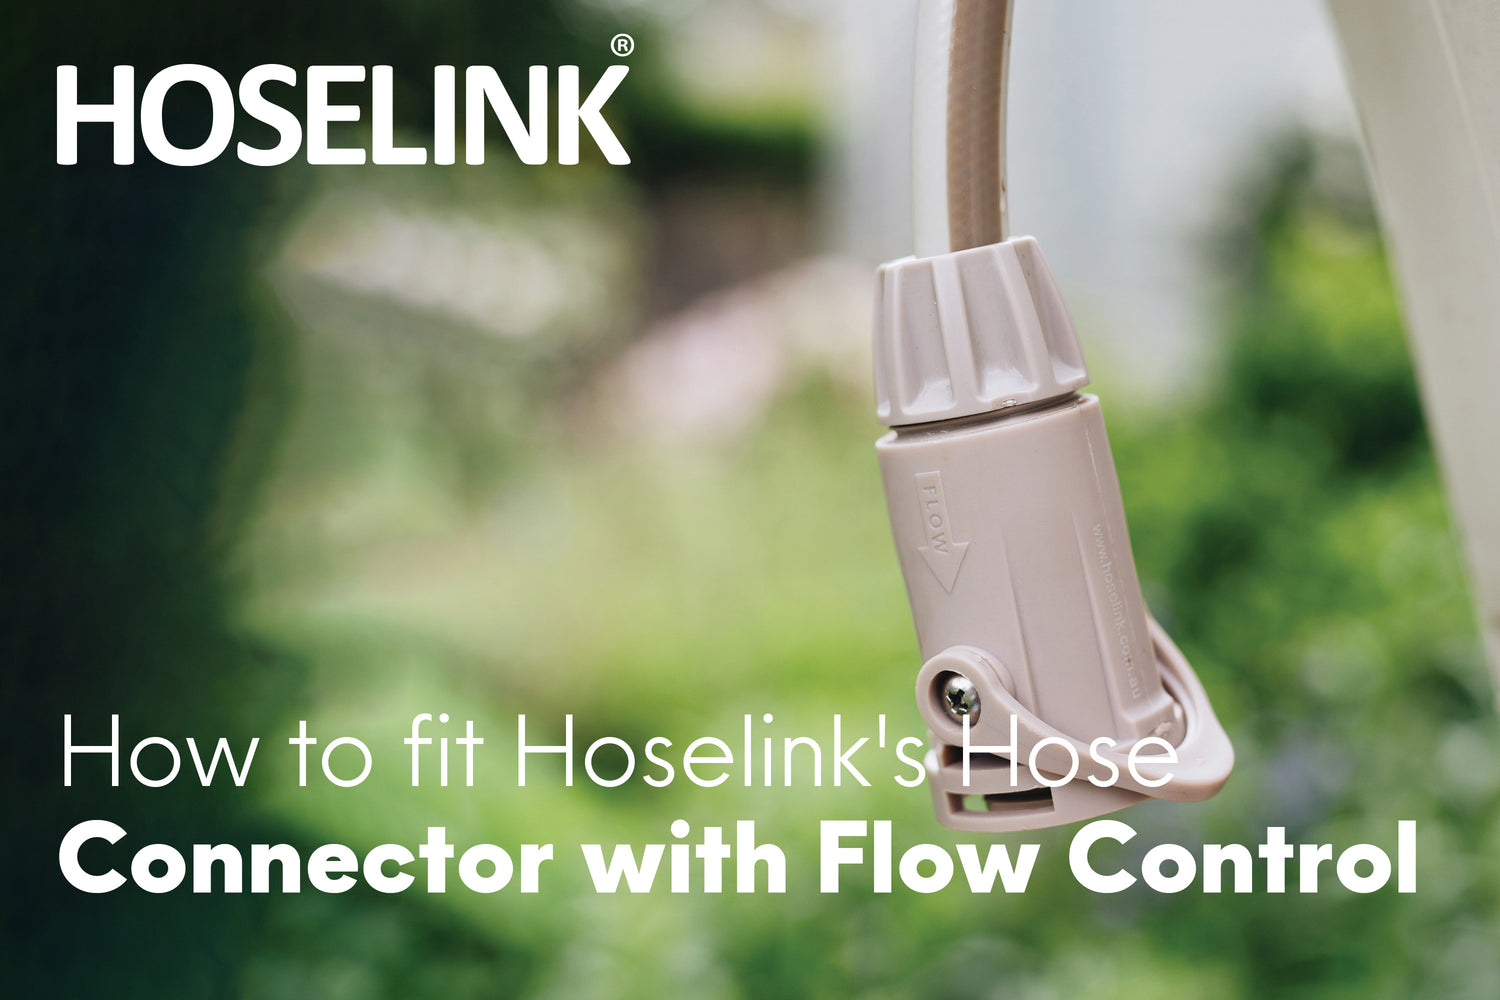 How to connect the Hoselink Hose Connector with Flow Control